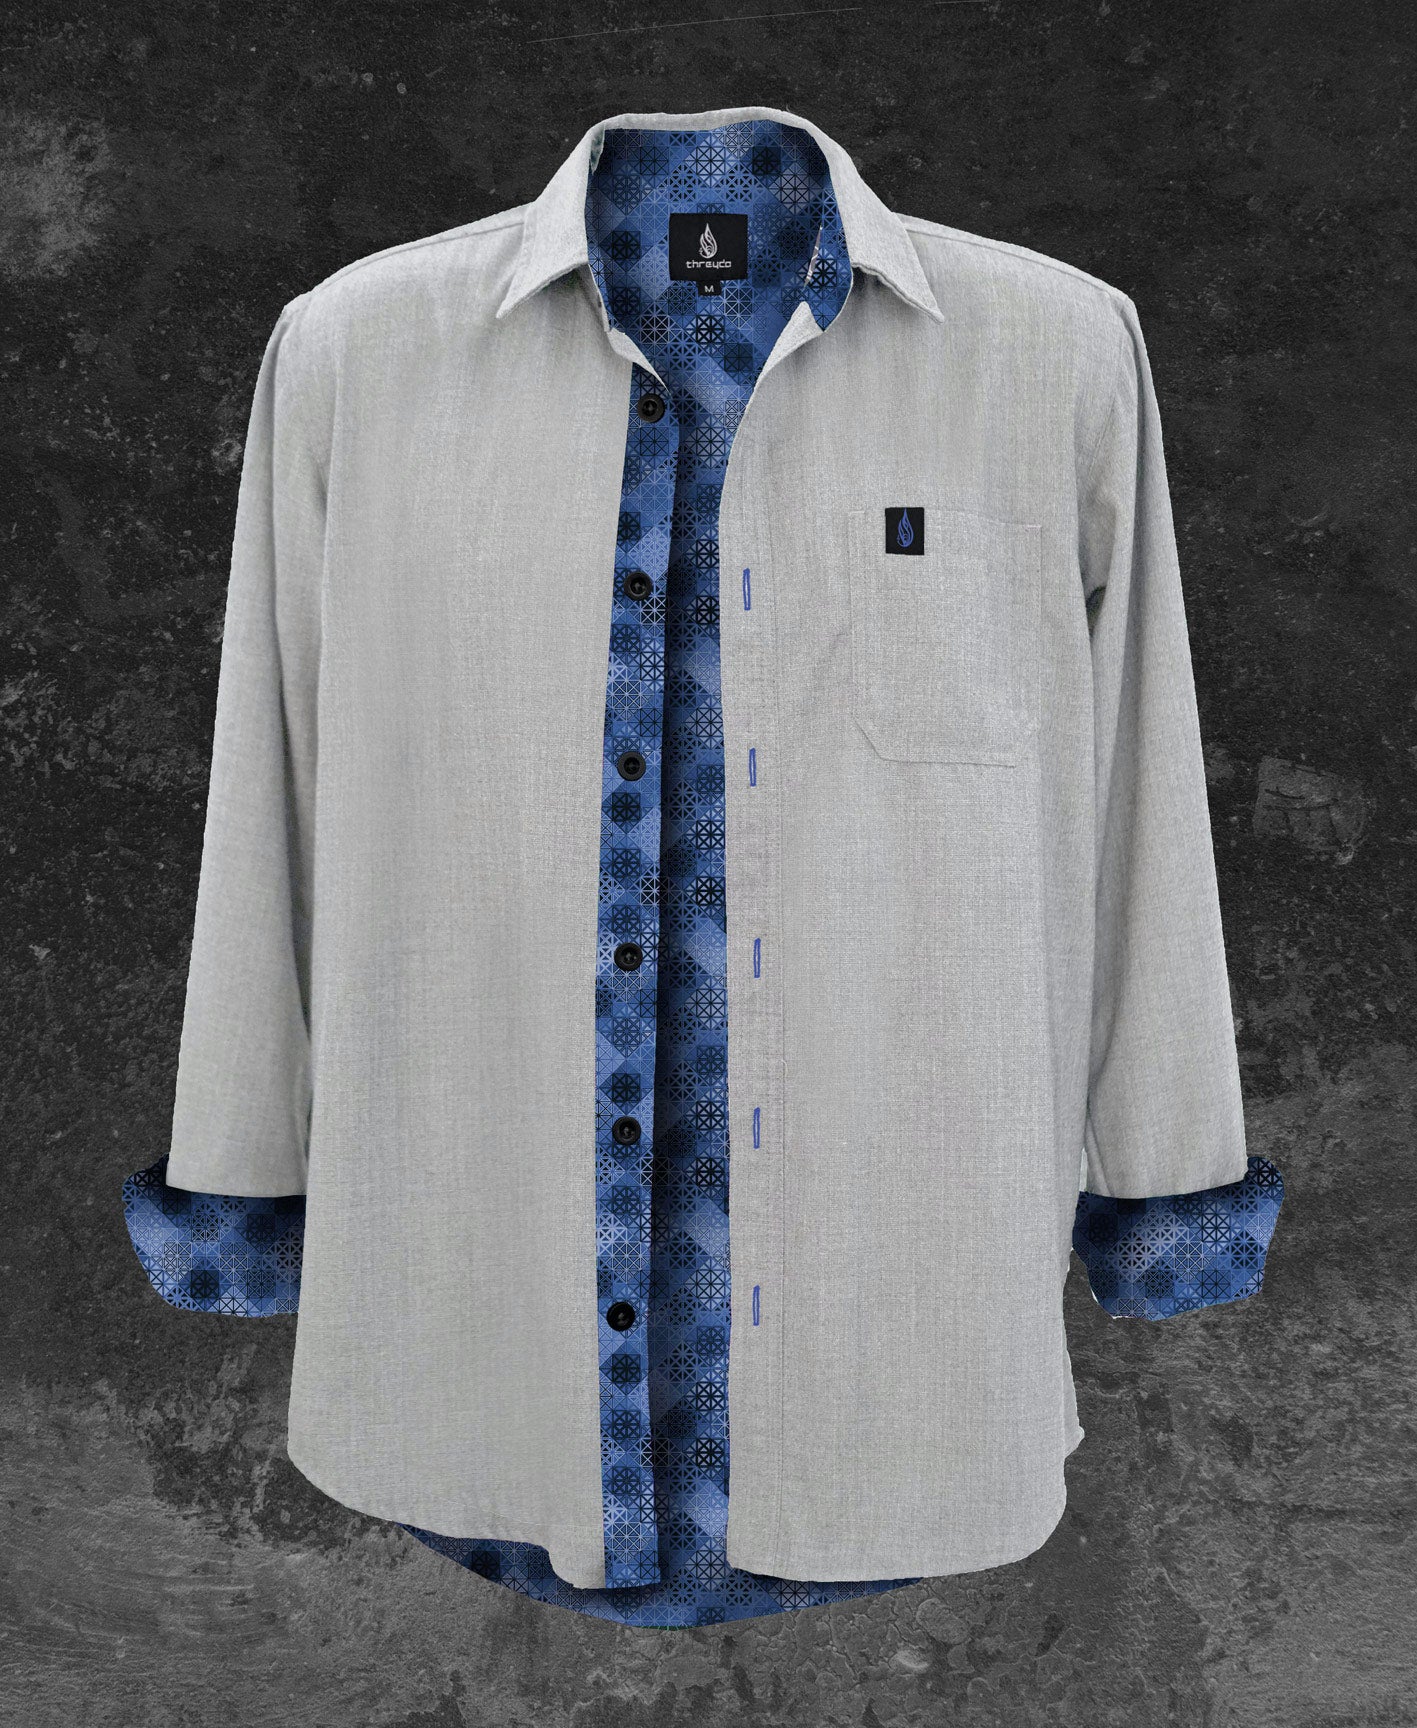 Ultraviolet Lined Button Down Shirt by Threyda